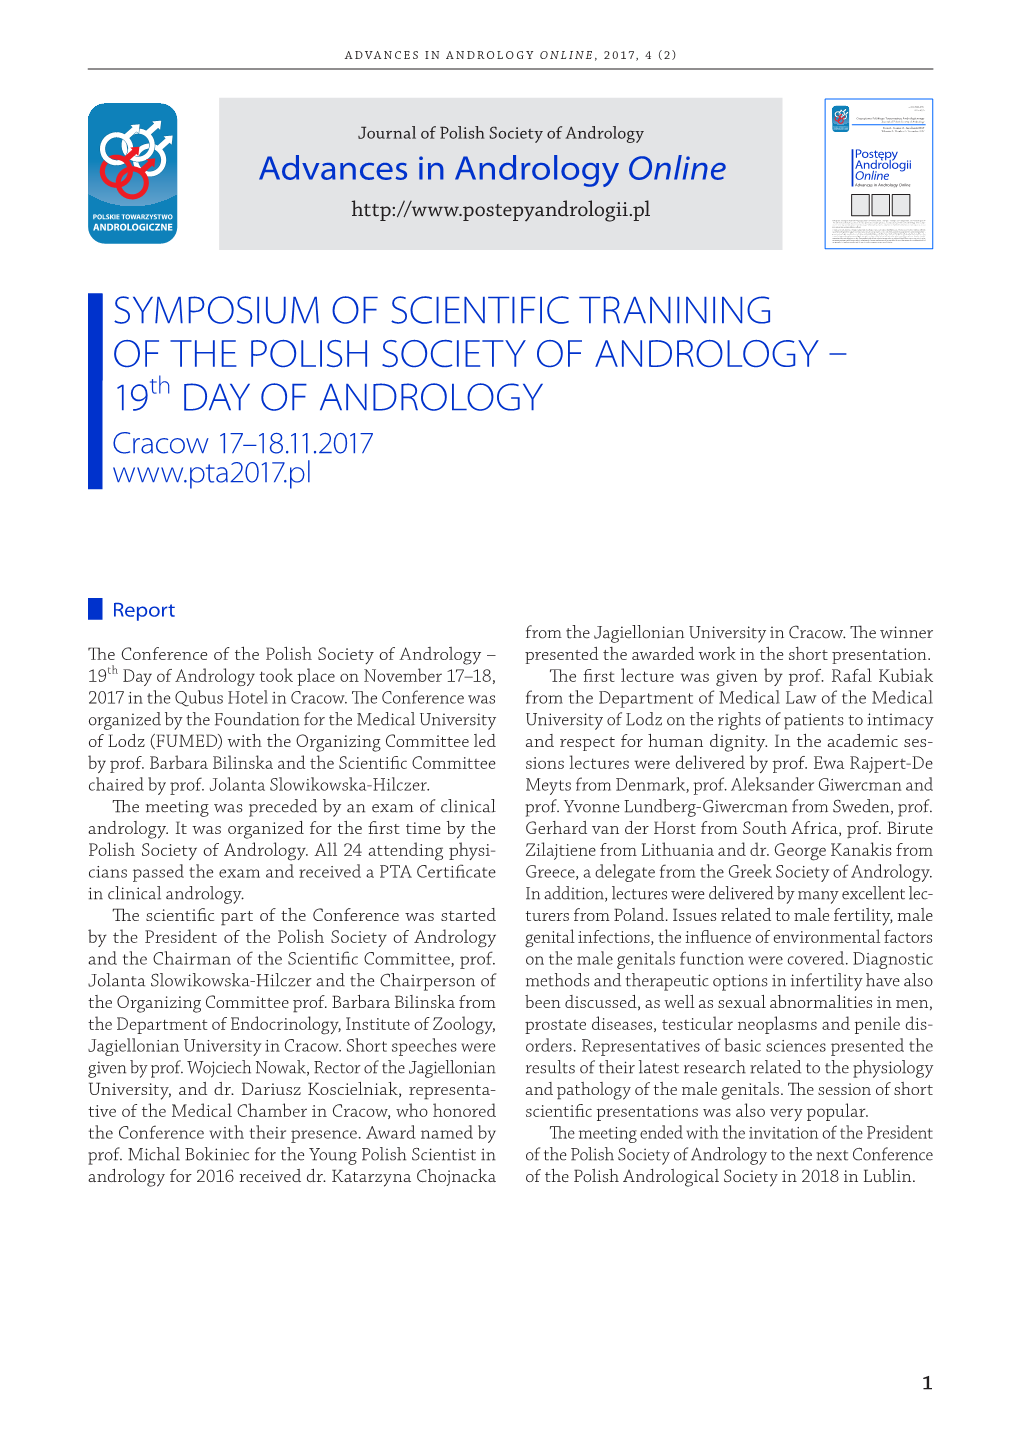 SYMPOSIUM of SCIENTIFIC TRANINING of the POLISH SOCIETY of ANDROLOGY – 19Th DAY of ANDROLOGY